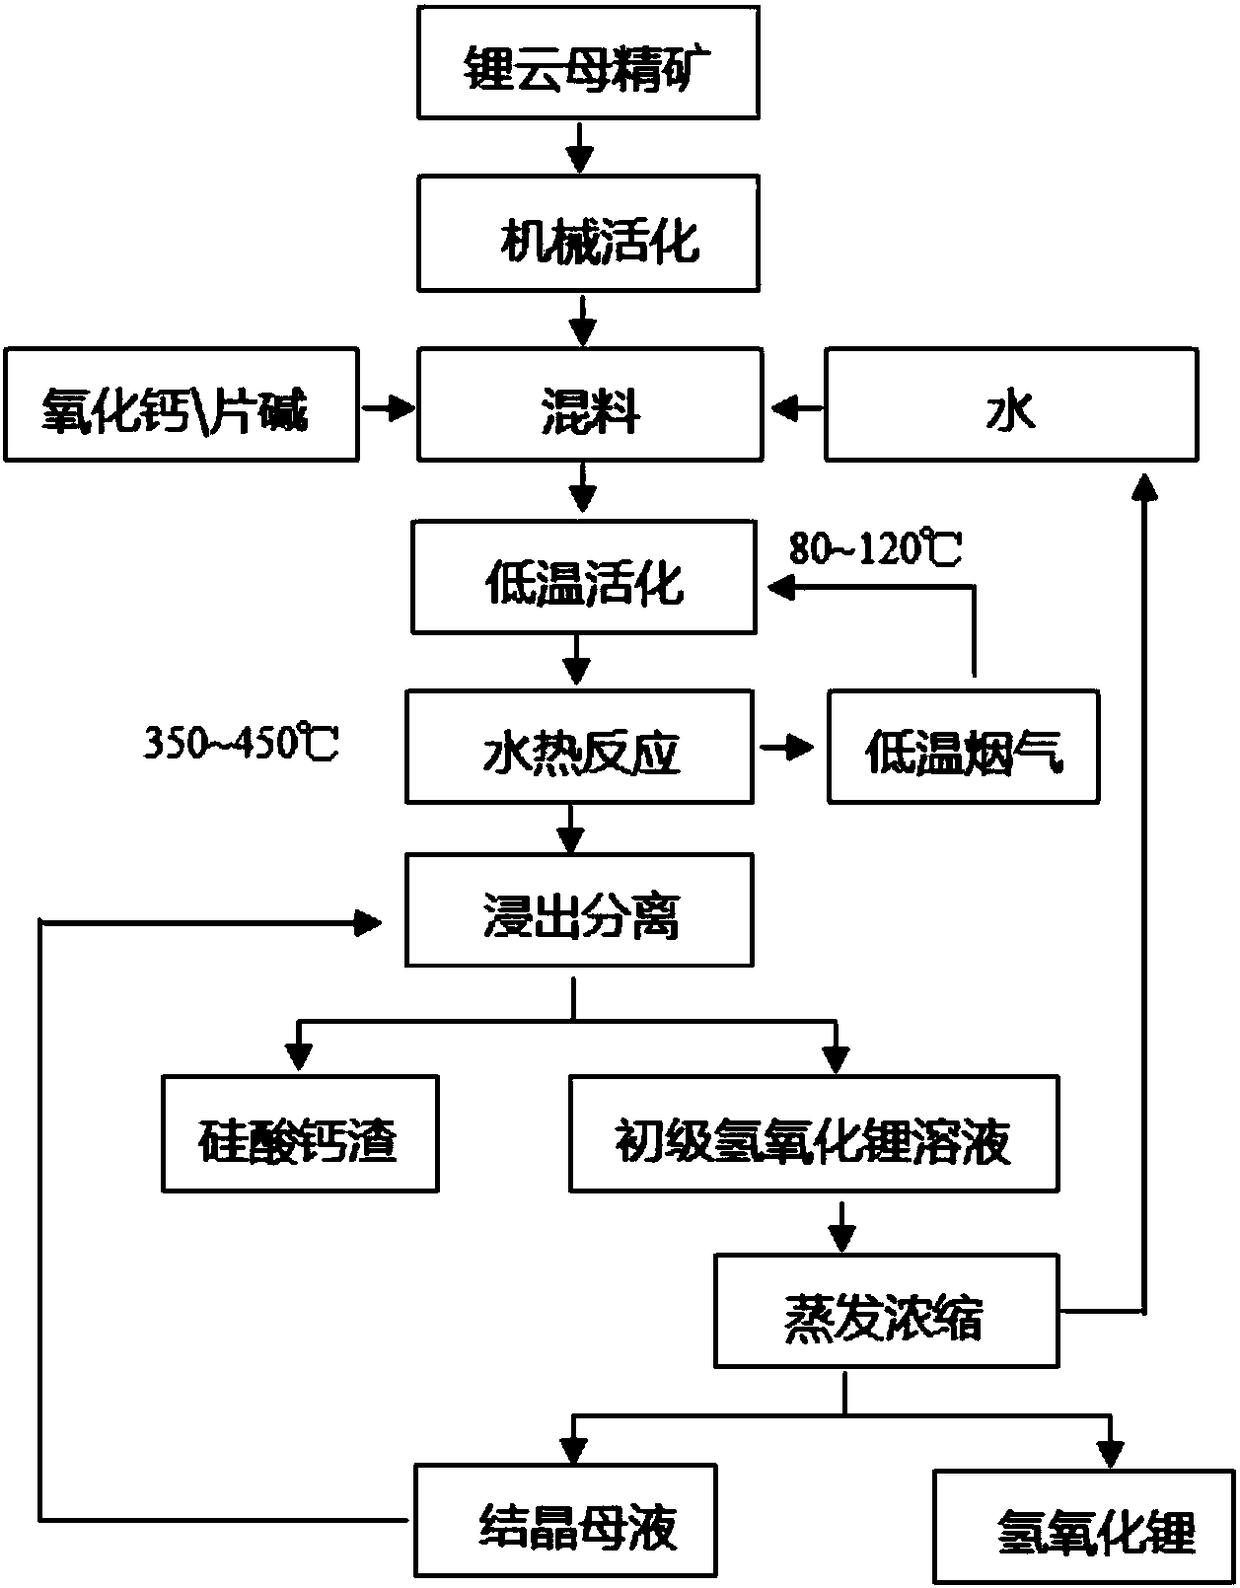 High temperature lepidolite hydrothermal treatment method for producing lithium hydroxide